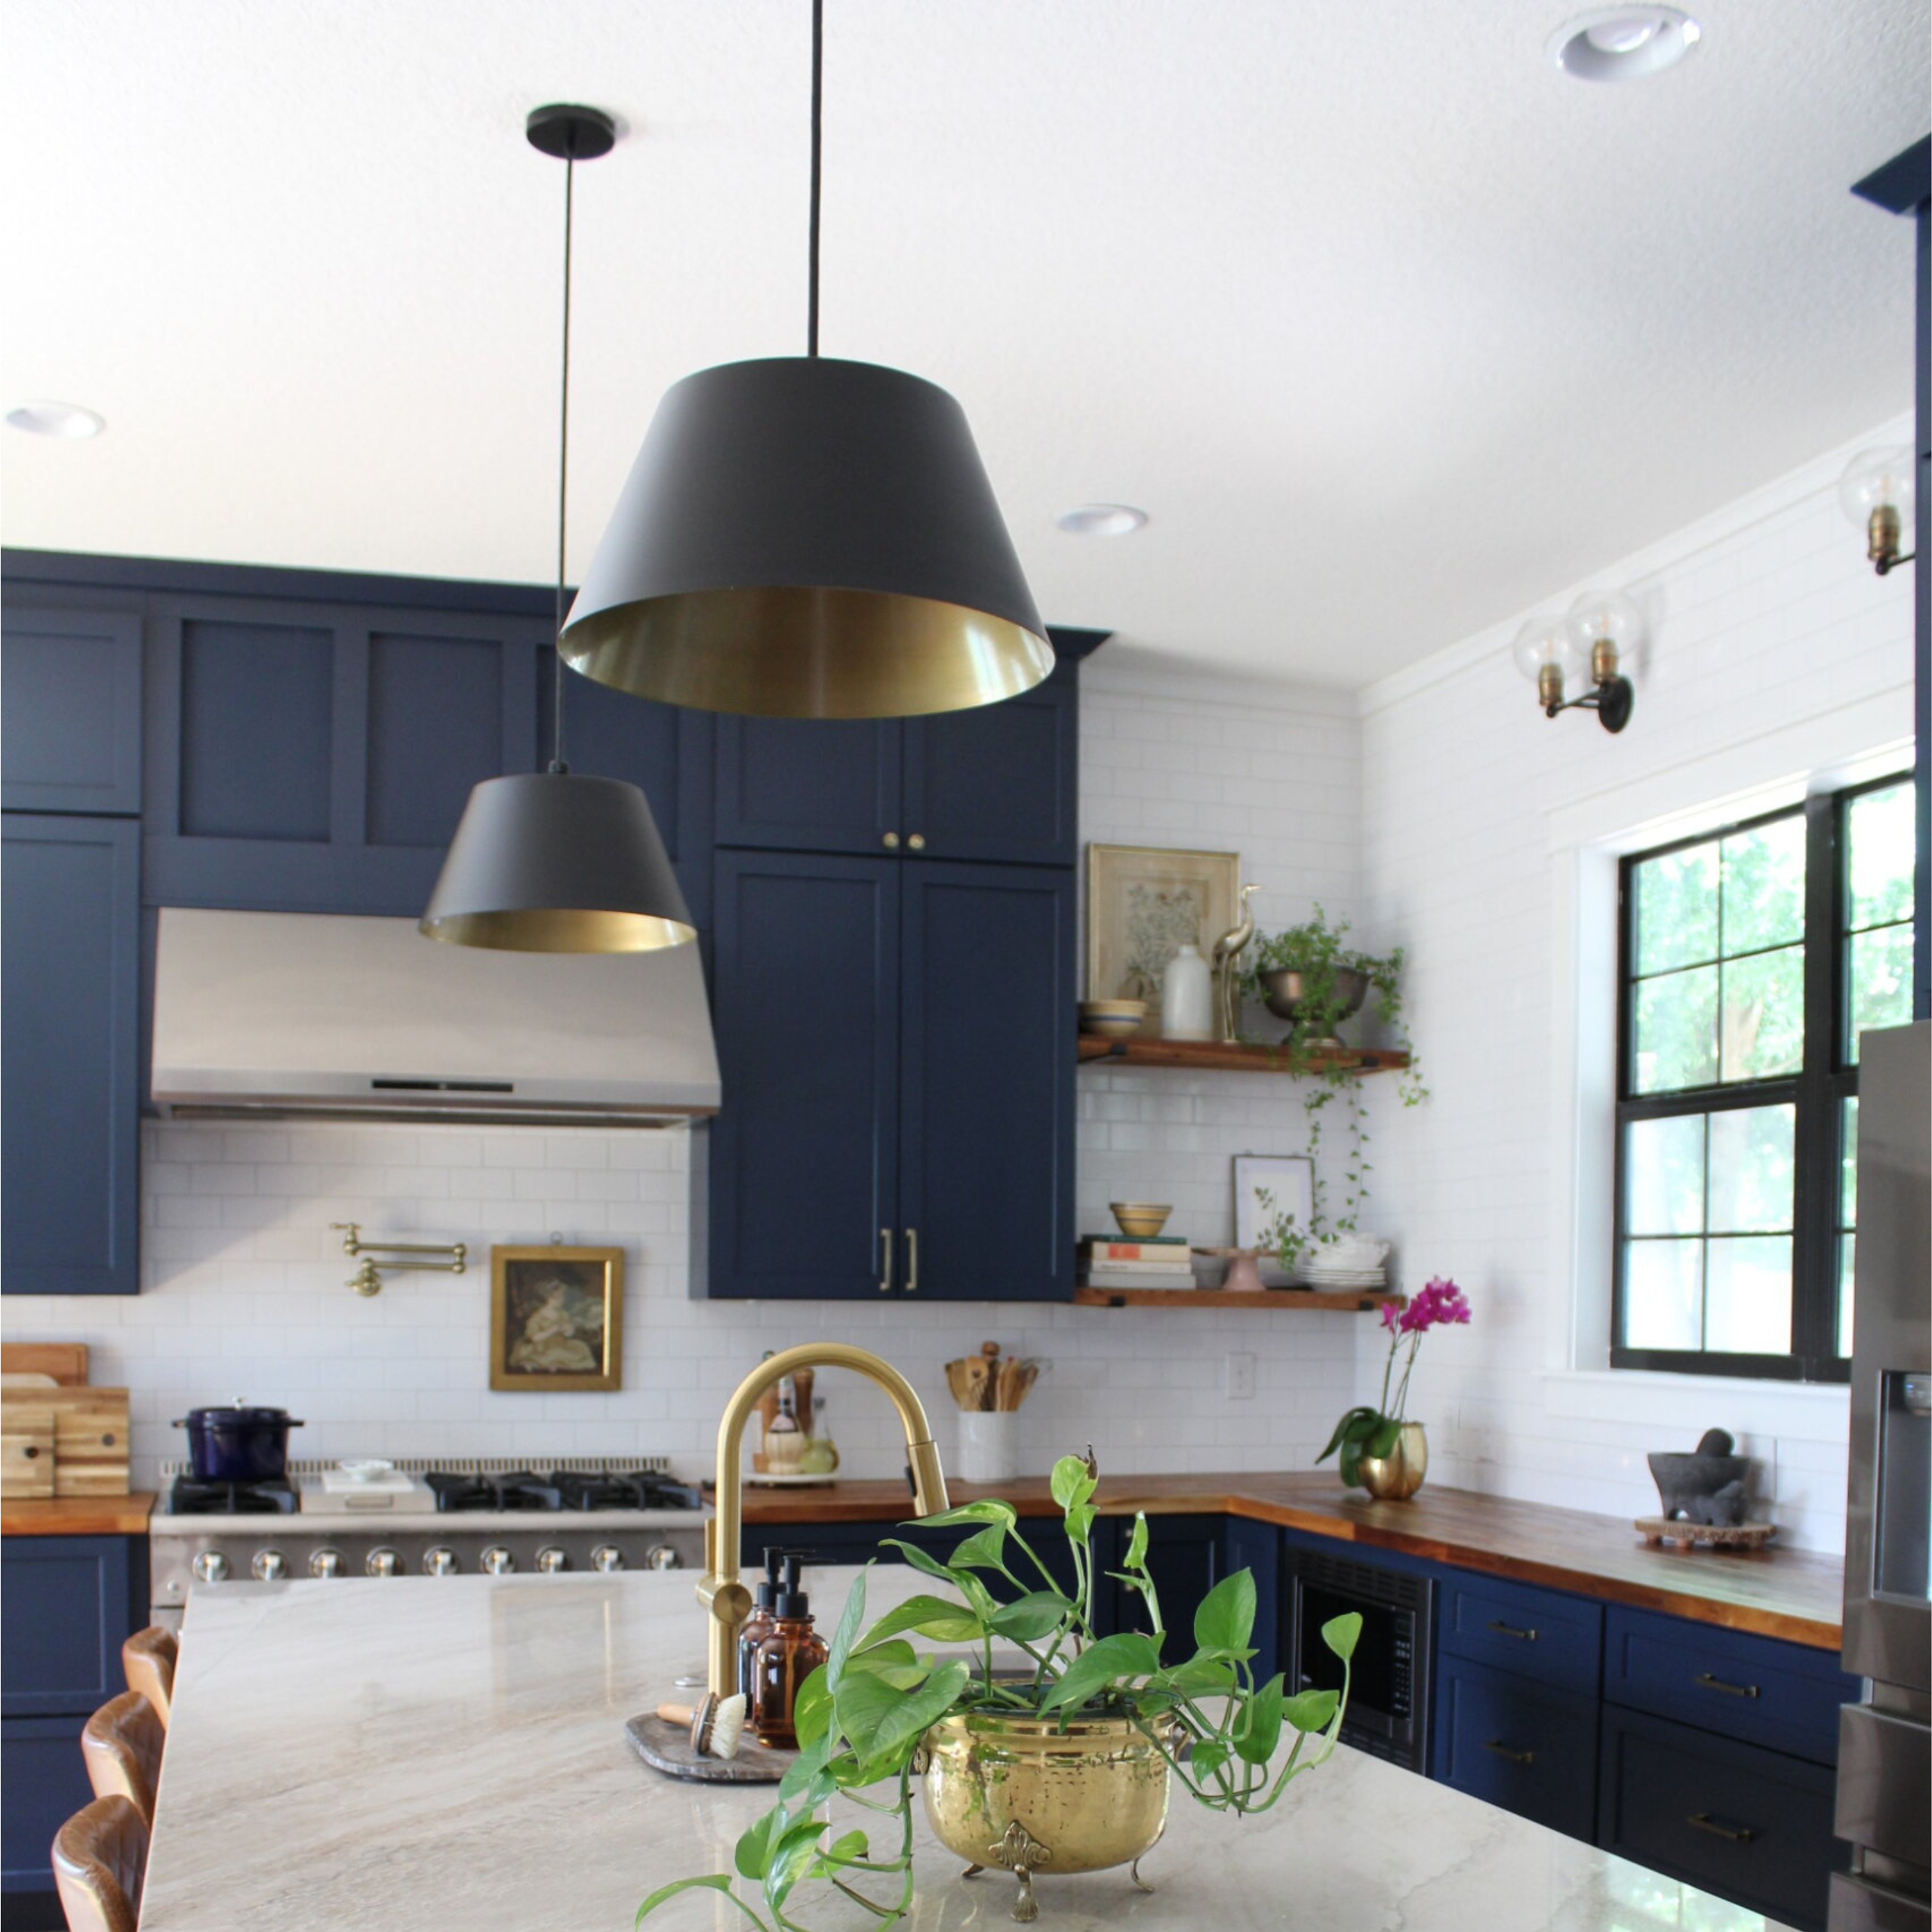 The Magnolia black Pendant Light with Brass In lay